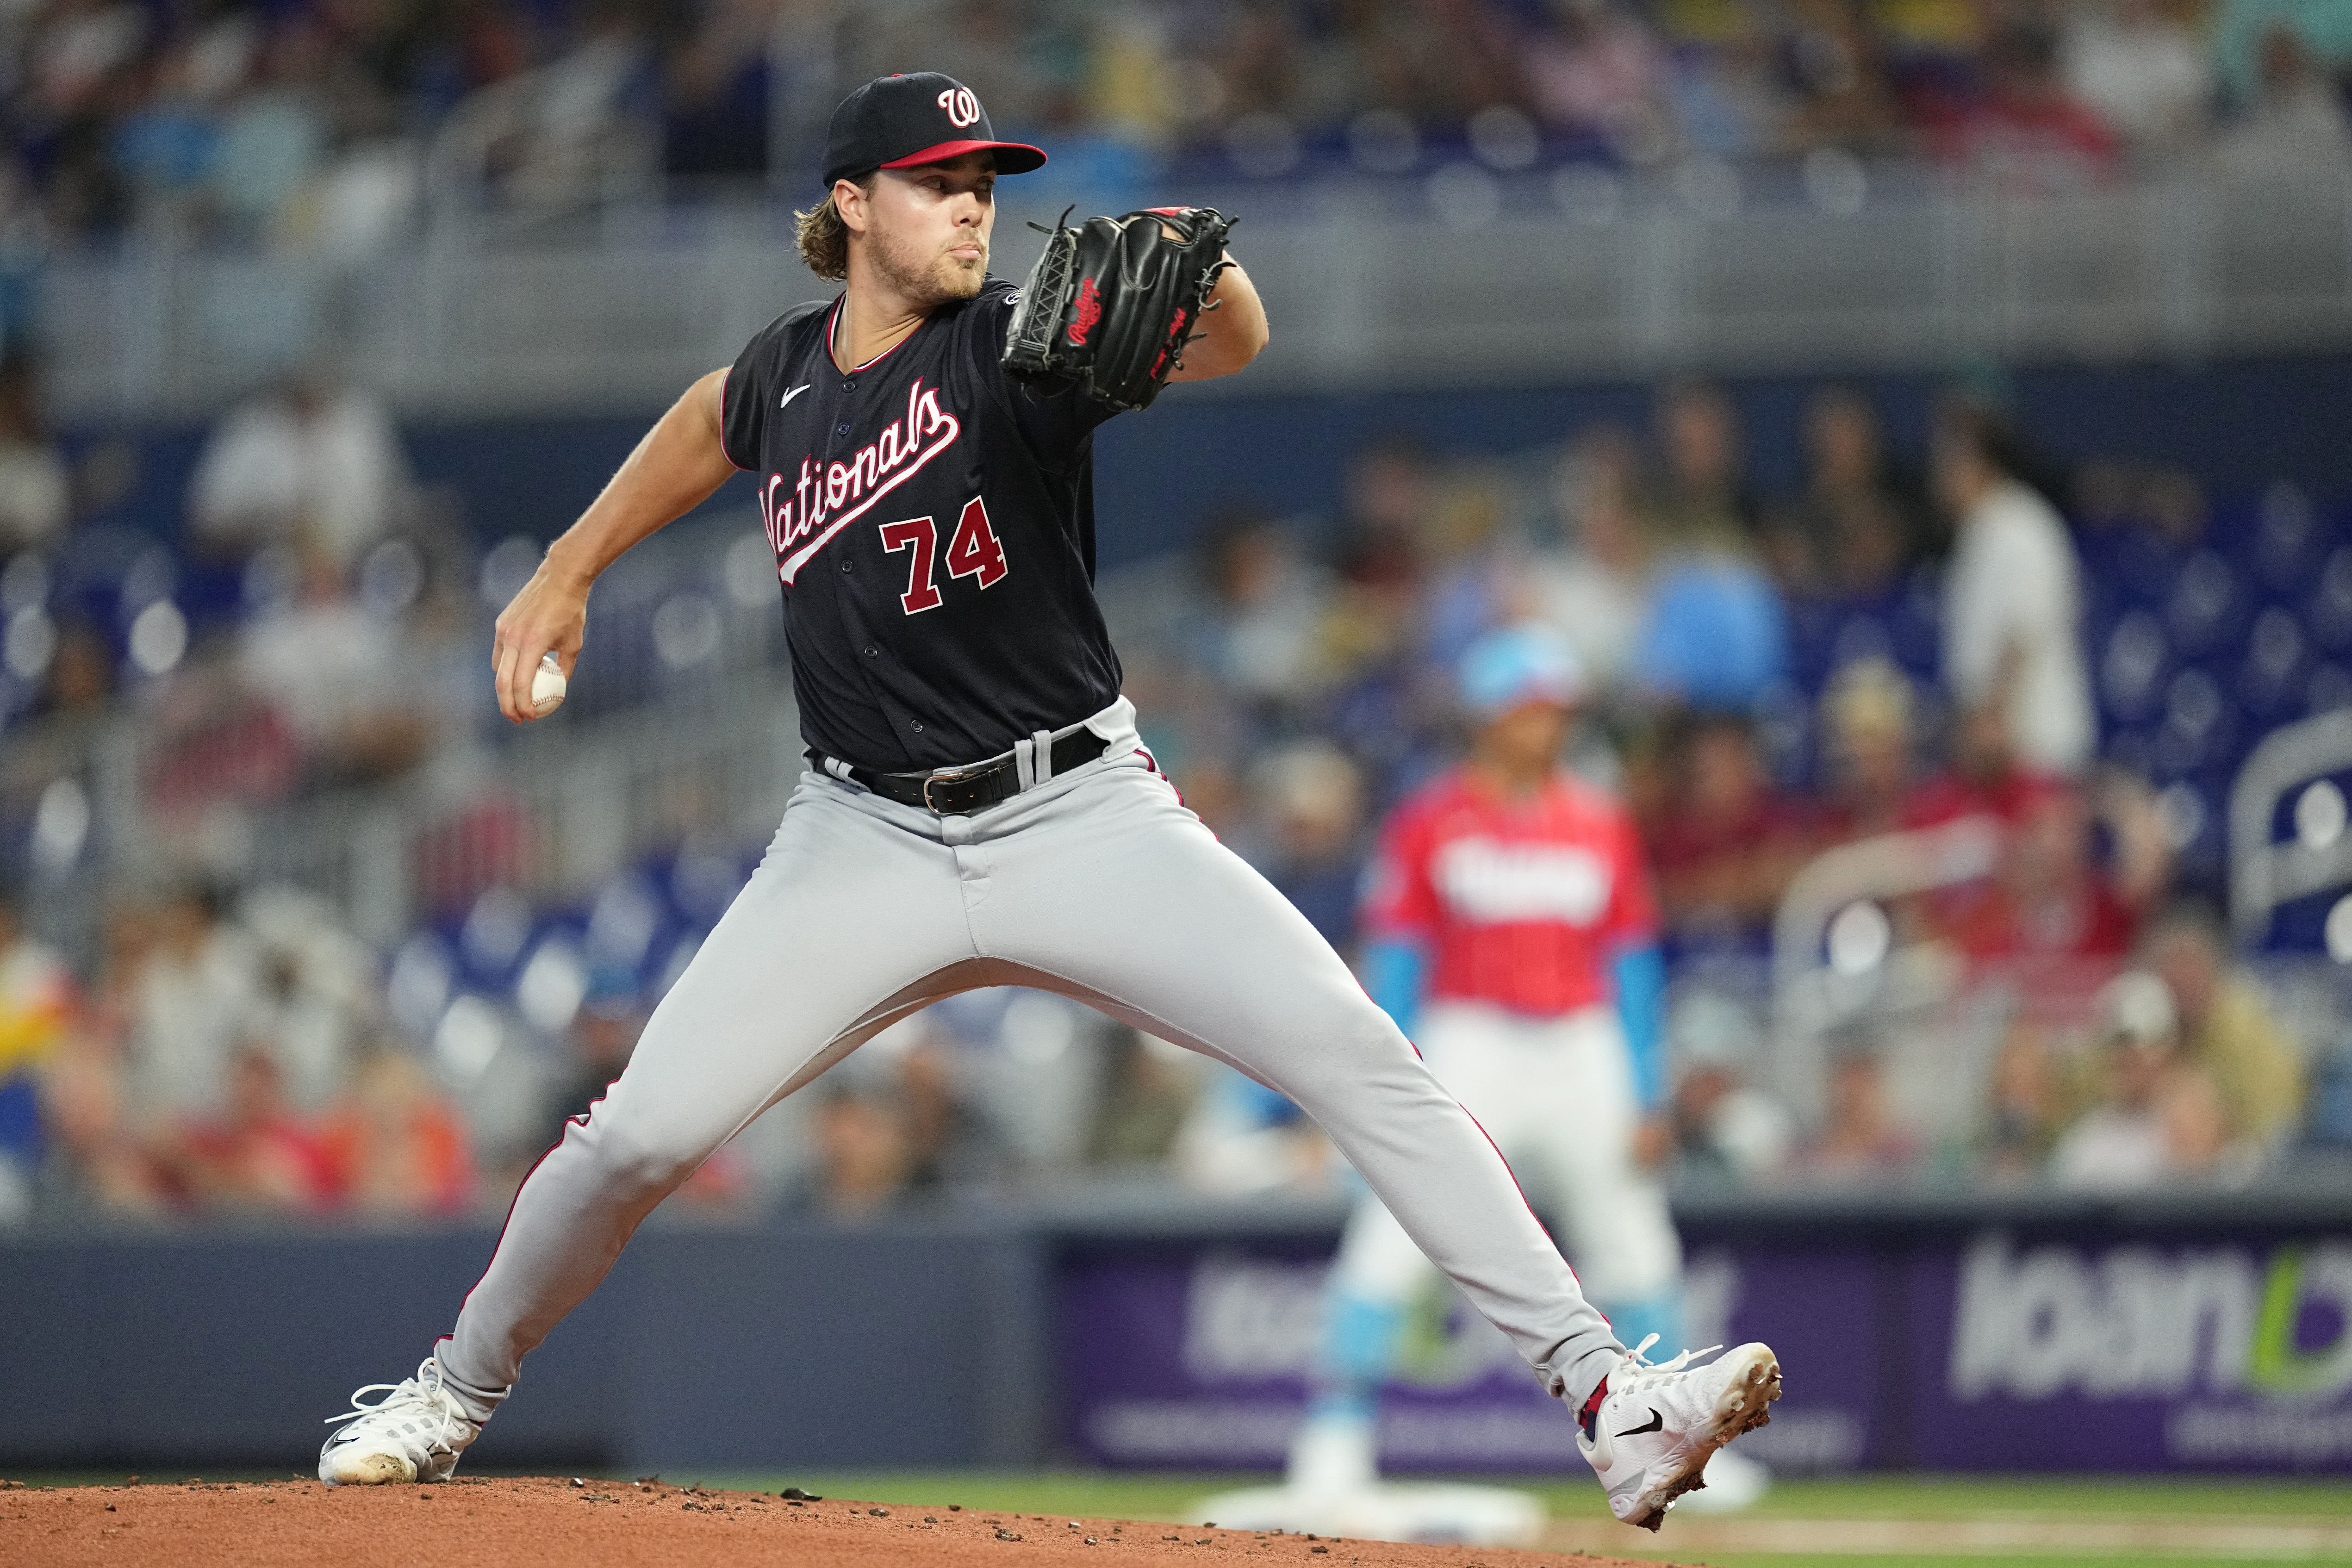 Nats rally in ninth to clip Marlins, 3-2